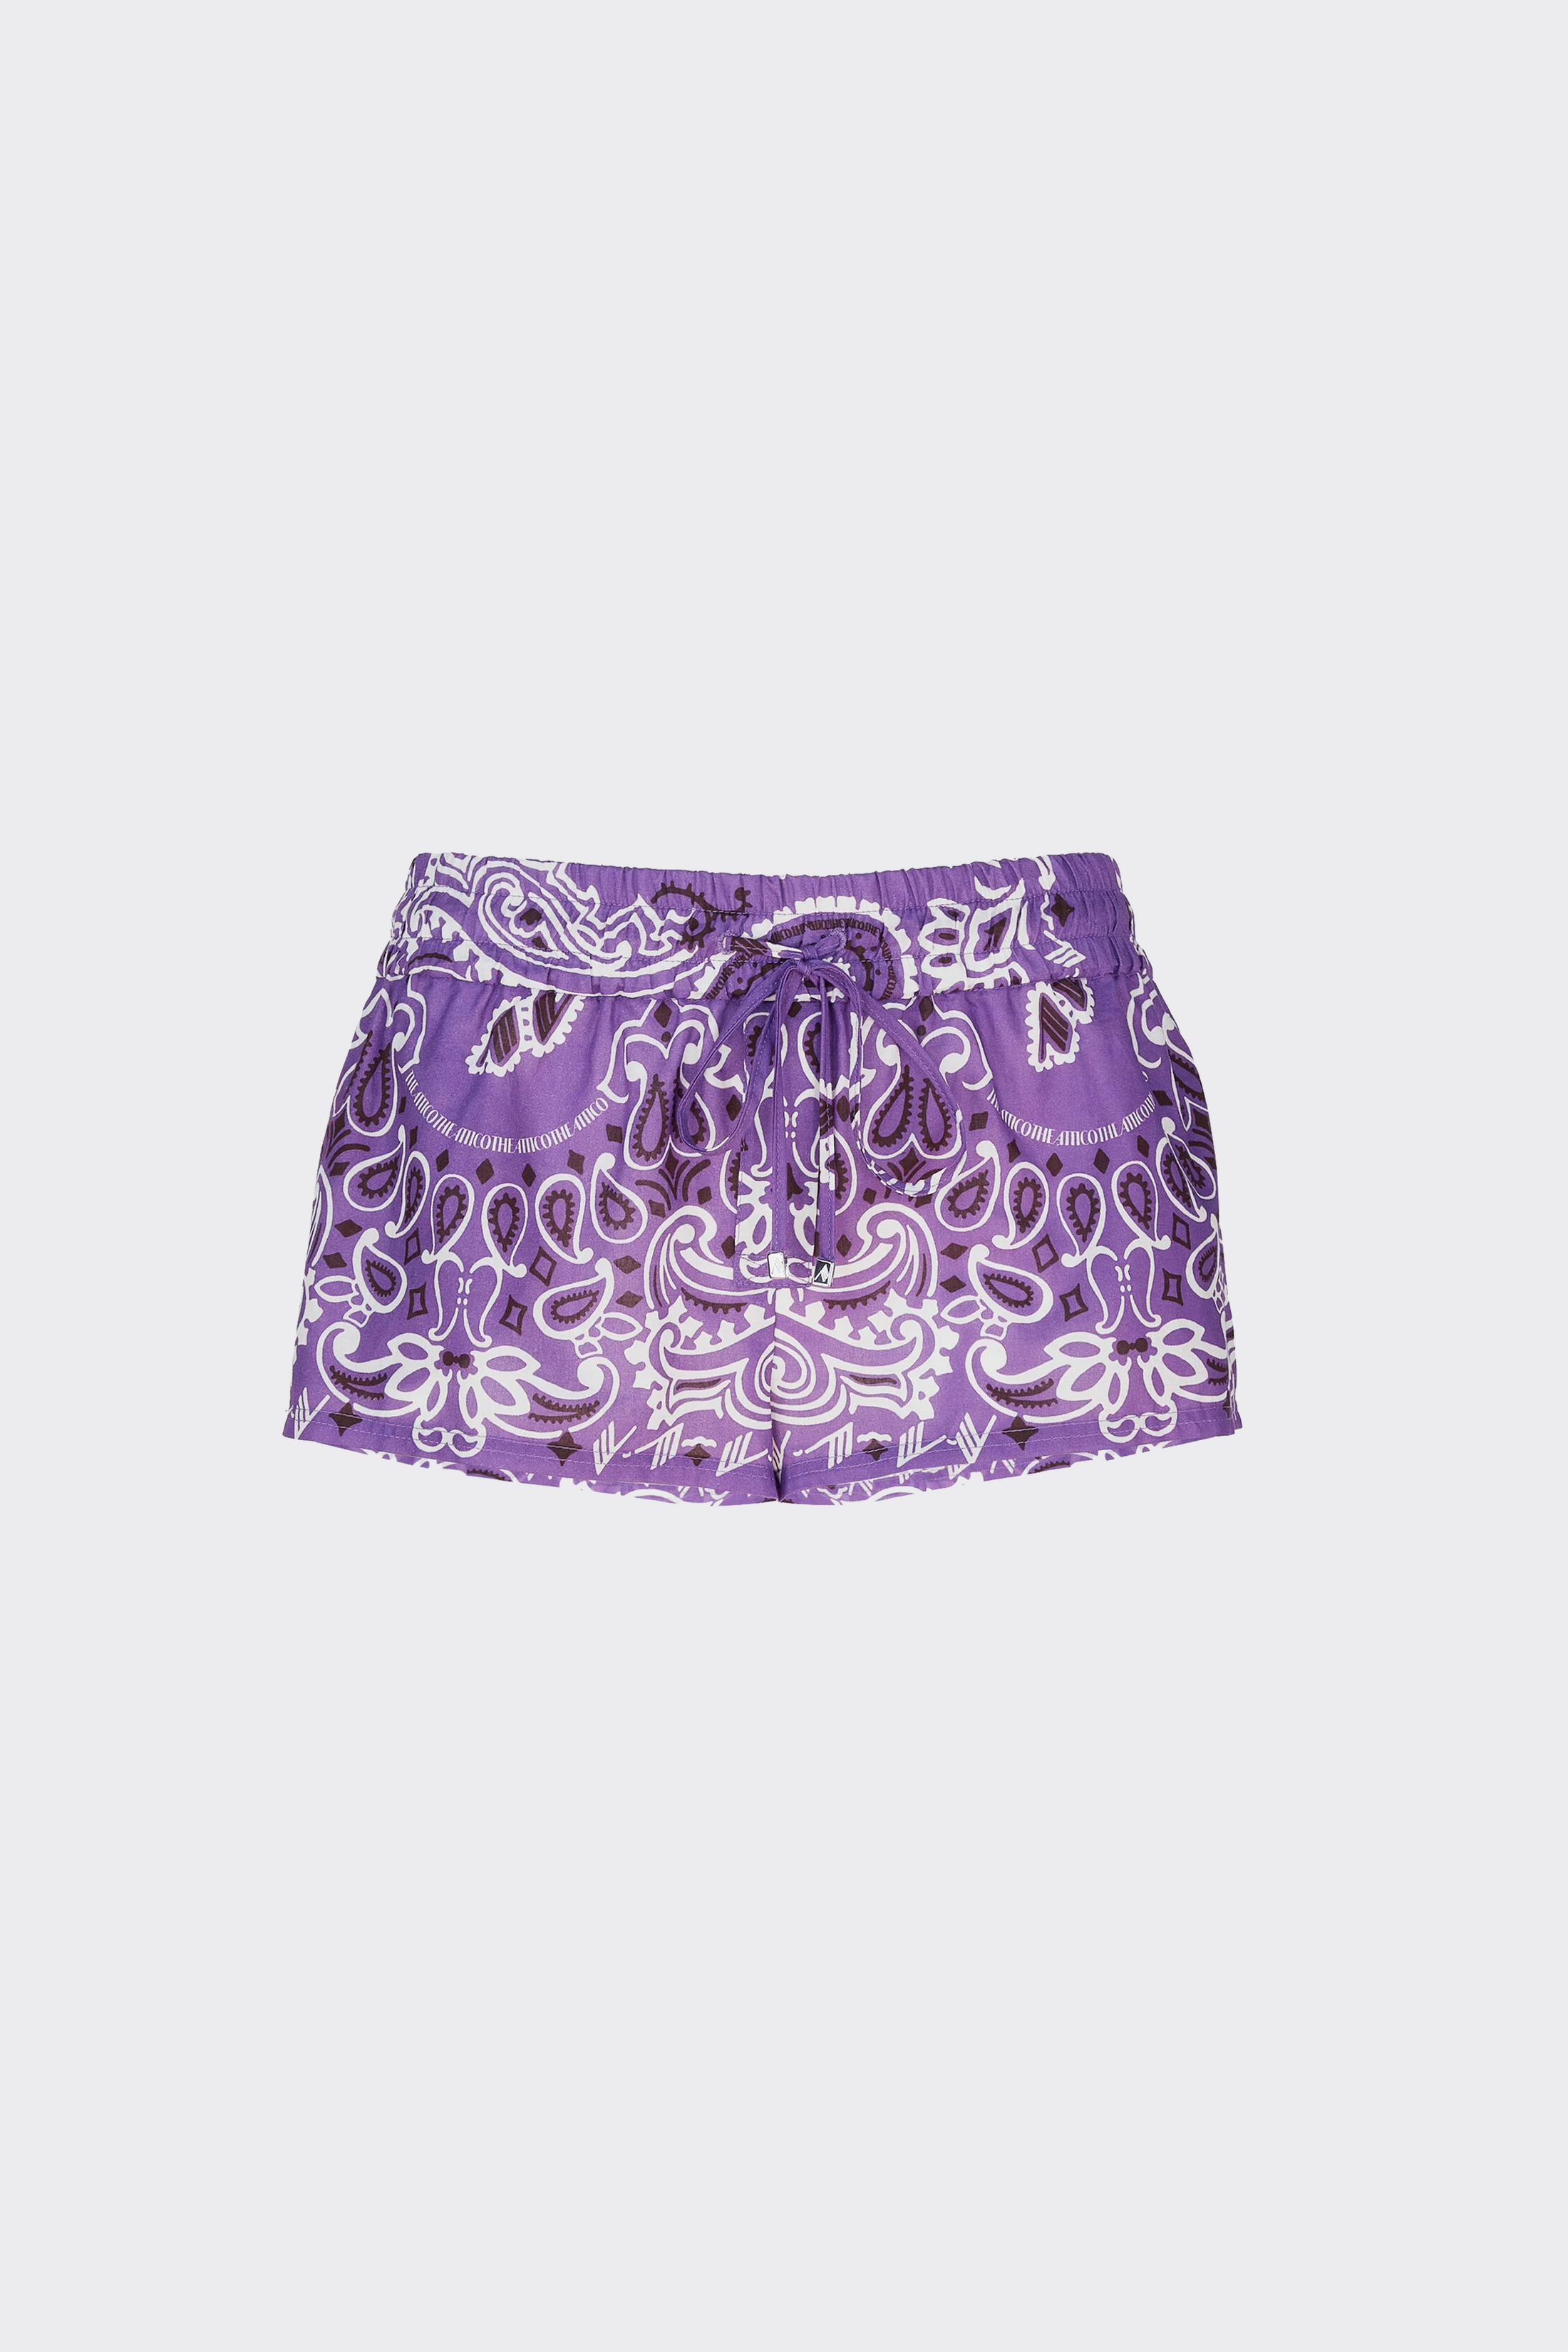 Violet/Brown and White Shorts